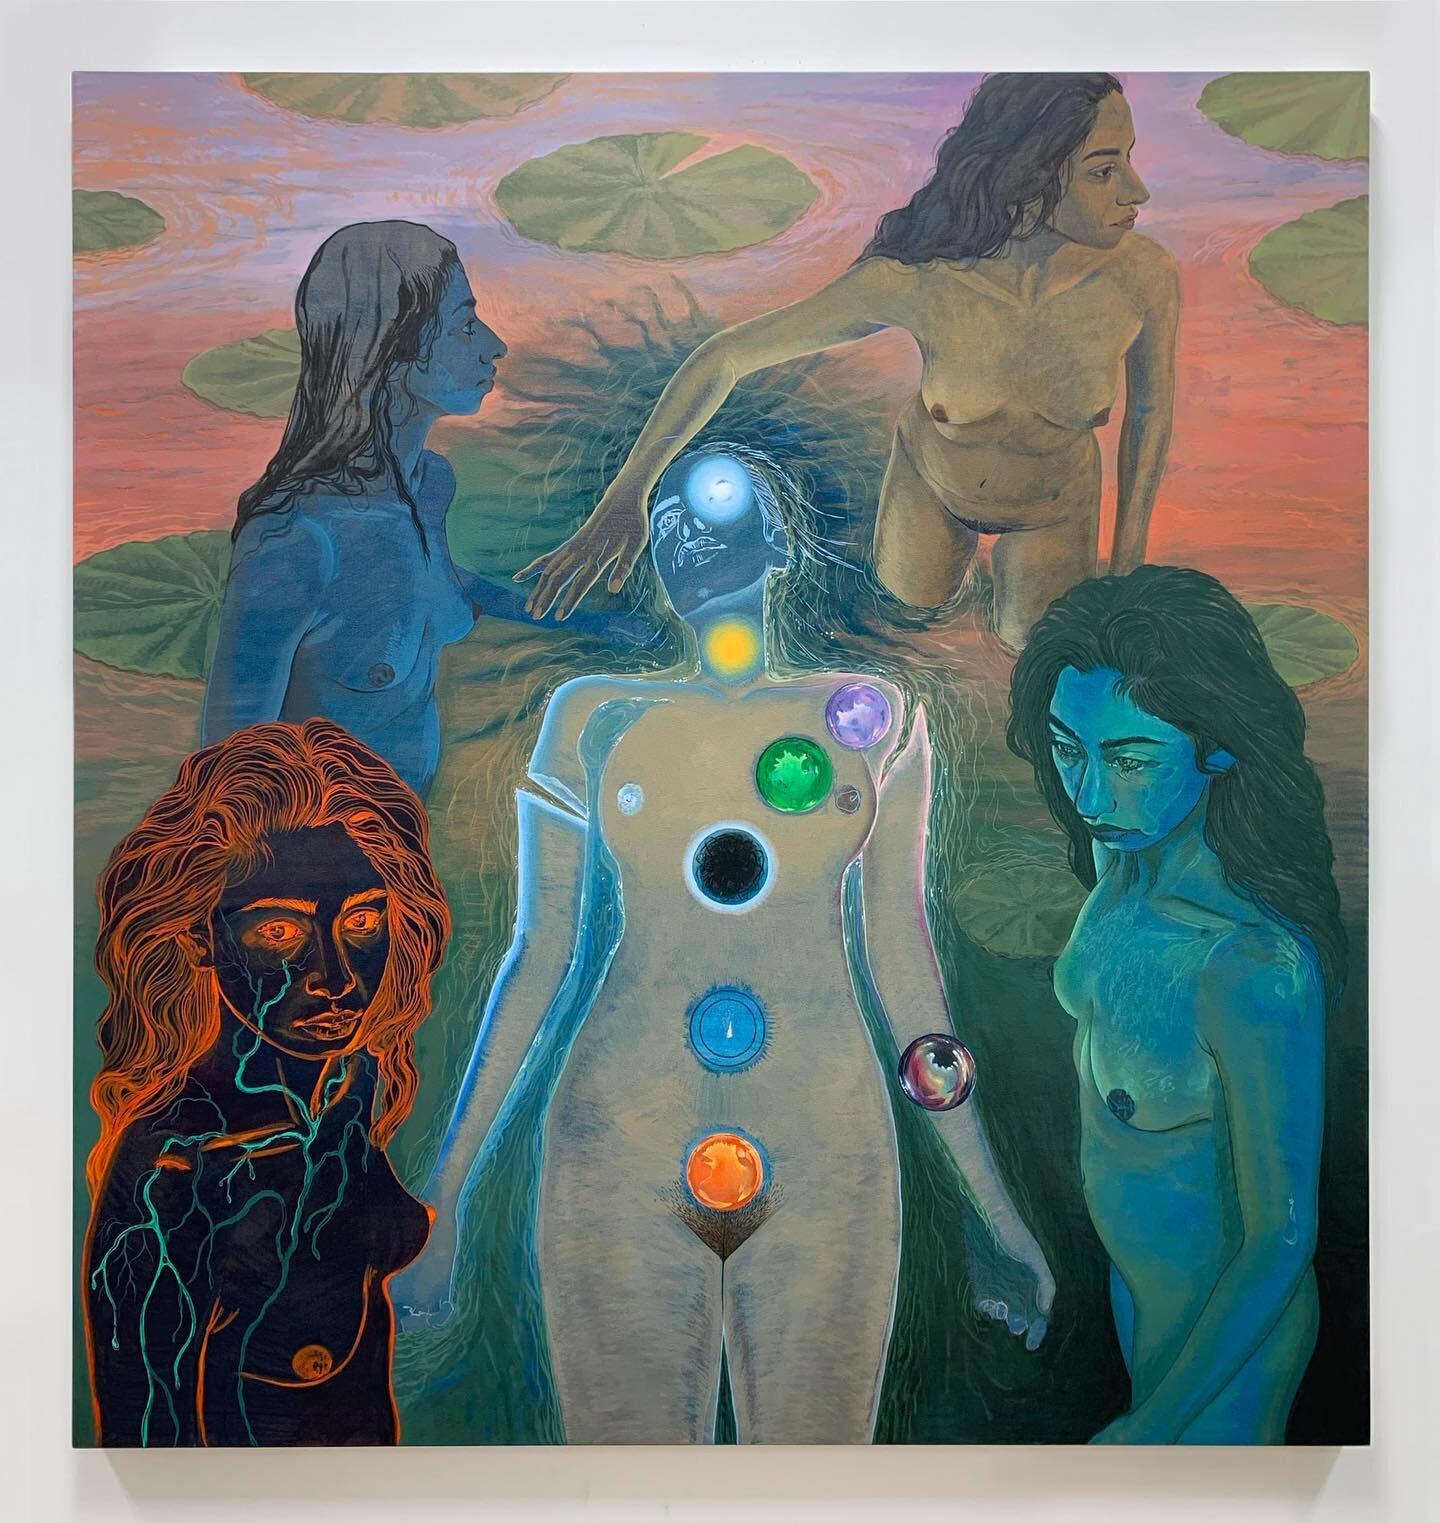 &ldquo;invocation&rdquo;
68&rdquo; x 64&rdquo; 
172.8 x 162.6 cm
oil on canvas
2023

Gallery 1957 
BOOTH 113
EXPO CHICAGO
13&ndash;16 APRIL 2023
NAVY PIER | CHICAGO

very pleased to show this painting, &ldquo;invocation&rdquo;, at Expo Chicago @expoc